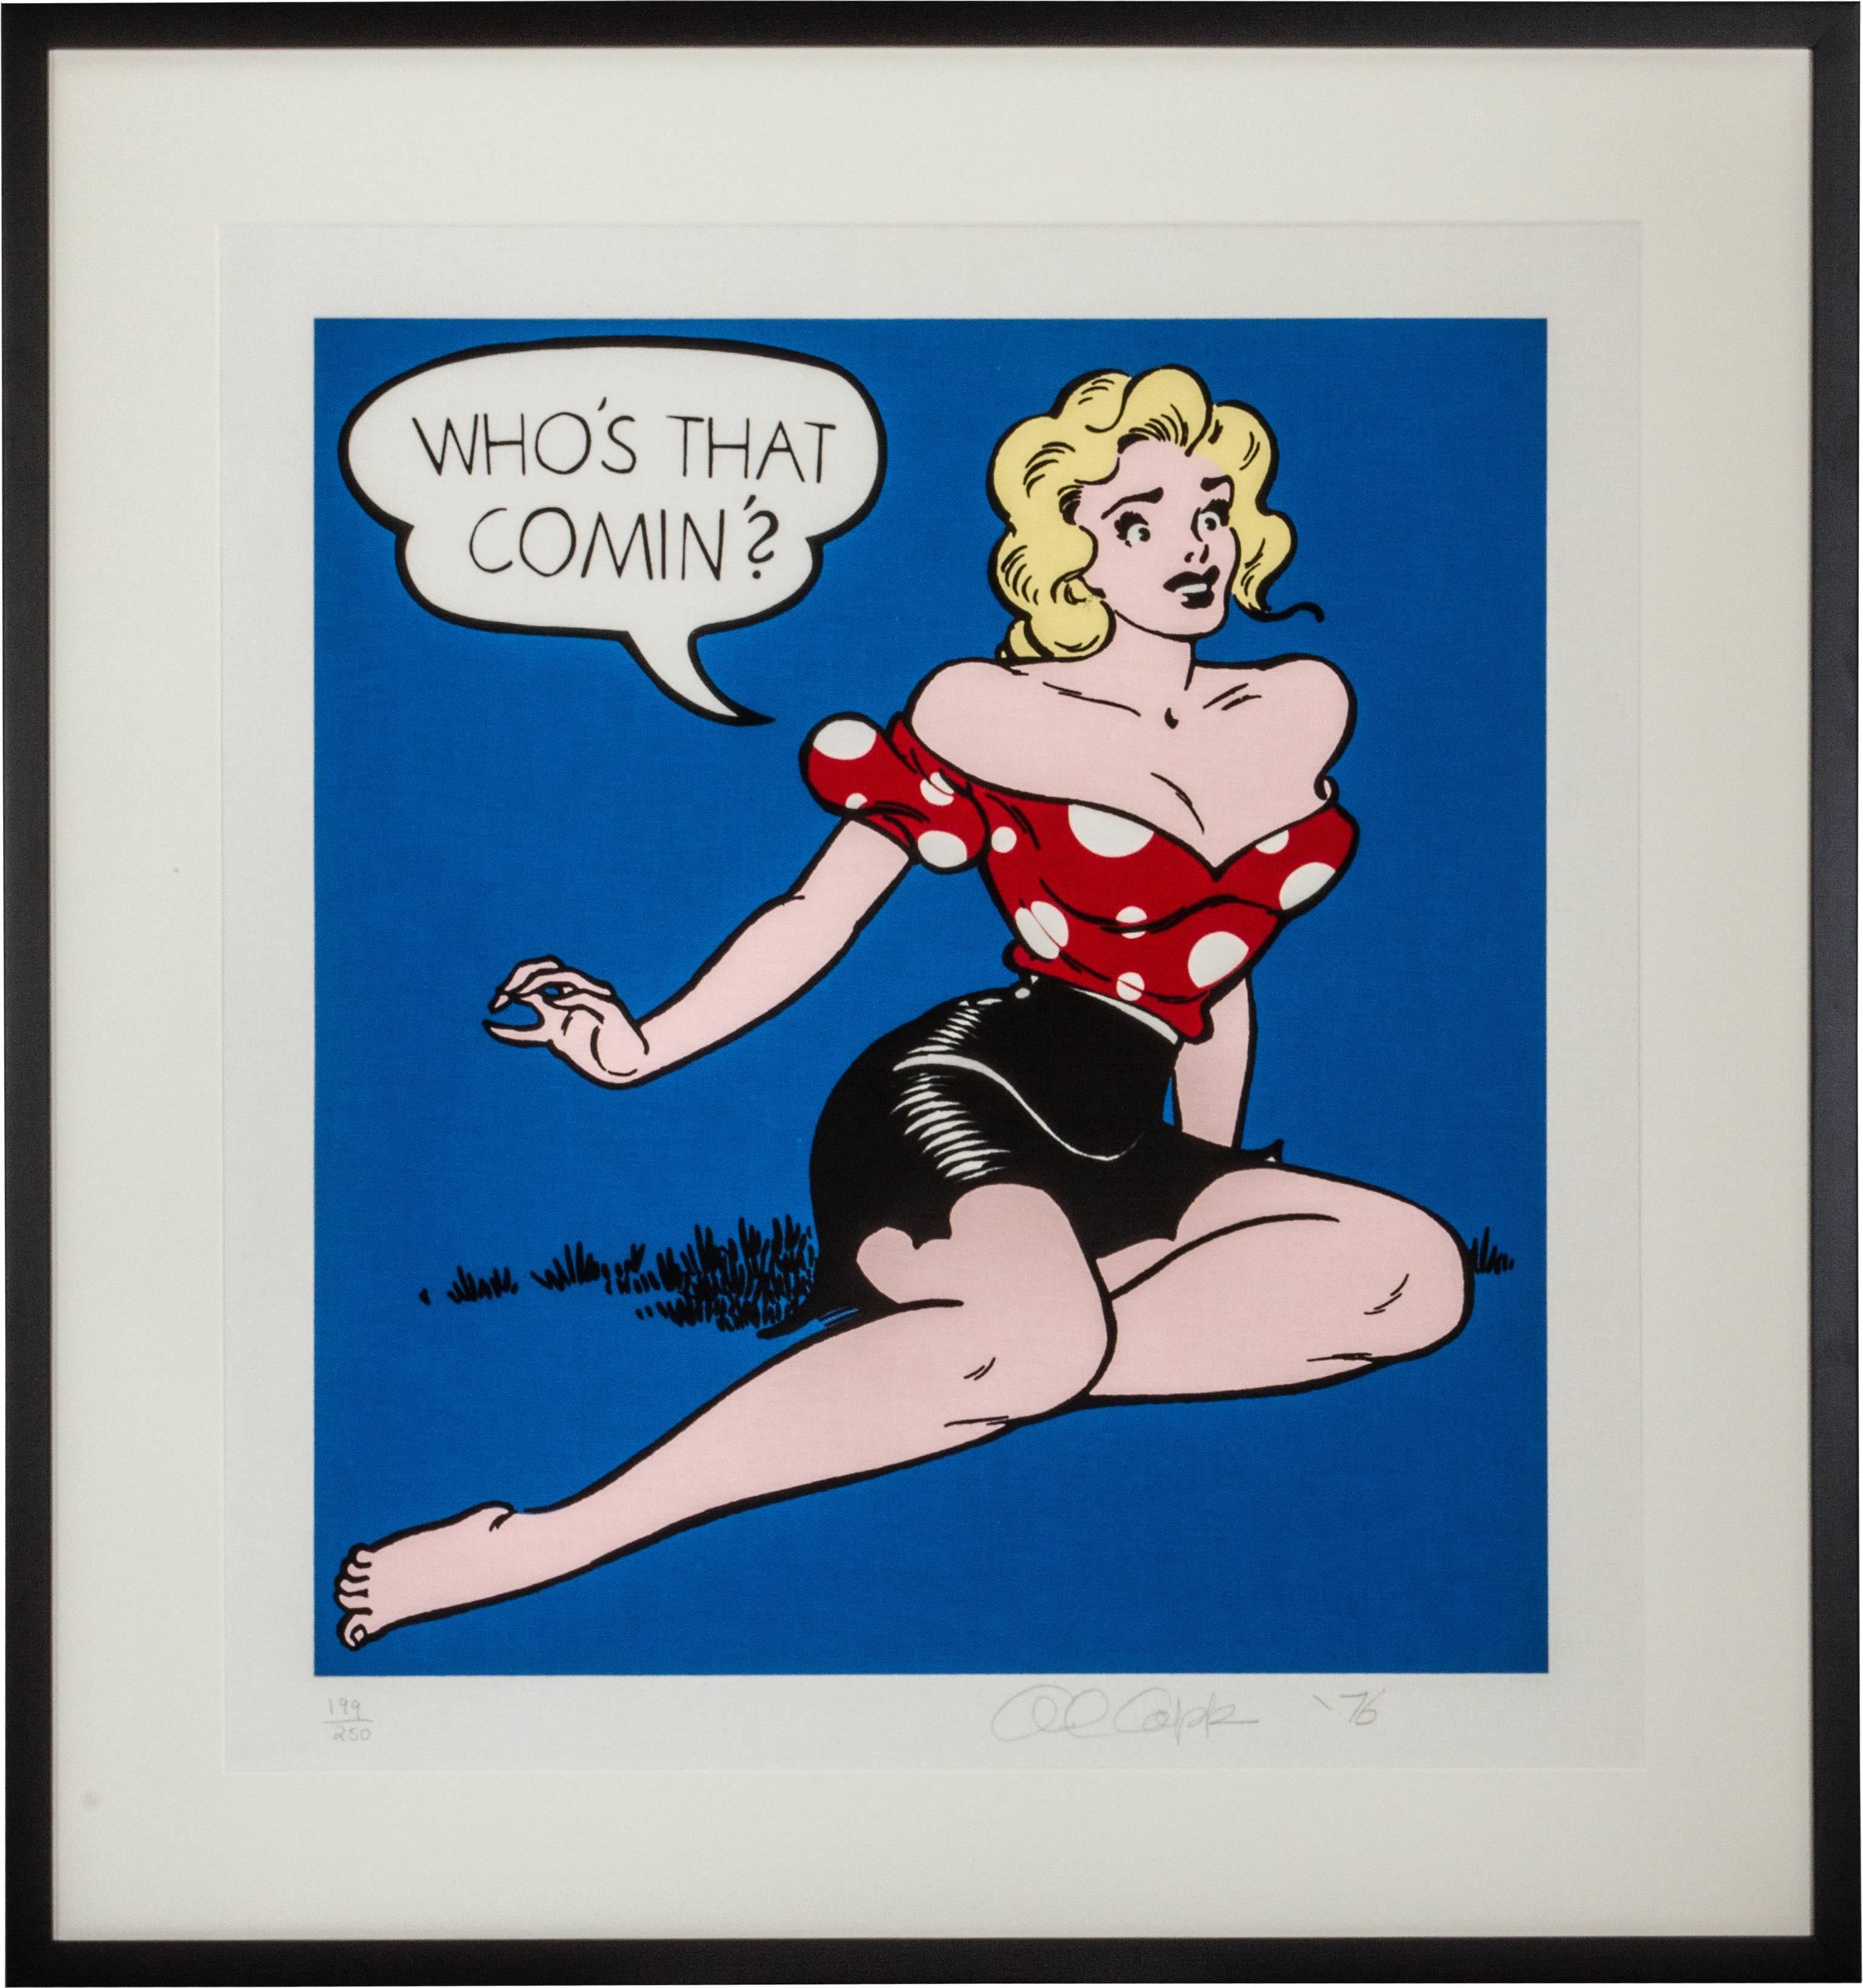 This is a fun depiction of Daisy Mae from the Little Abner series by Al Capp (American, 1909-1979). Who's That Comin'? is a color serigraph on linen paper, pencil numbered 199/250 and pencil signed and dated 1976. Measures: Sight: 22